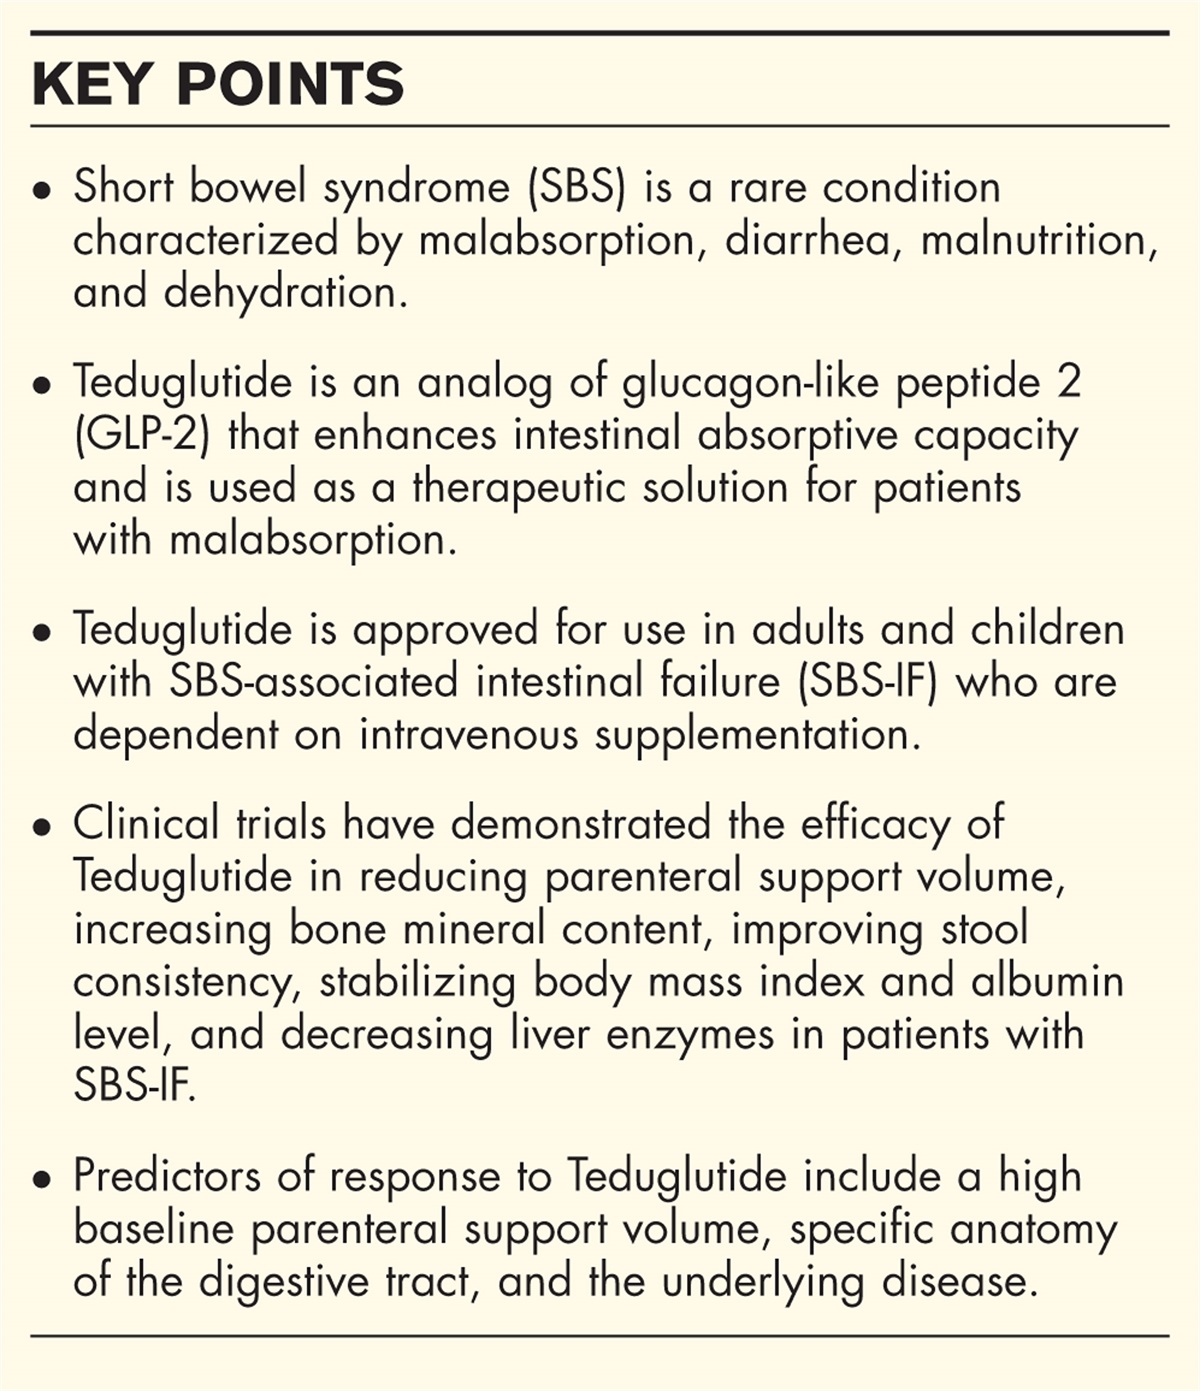 The indications and results of the use of teduglutide in patients with short bowel